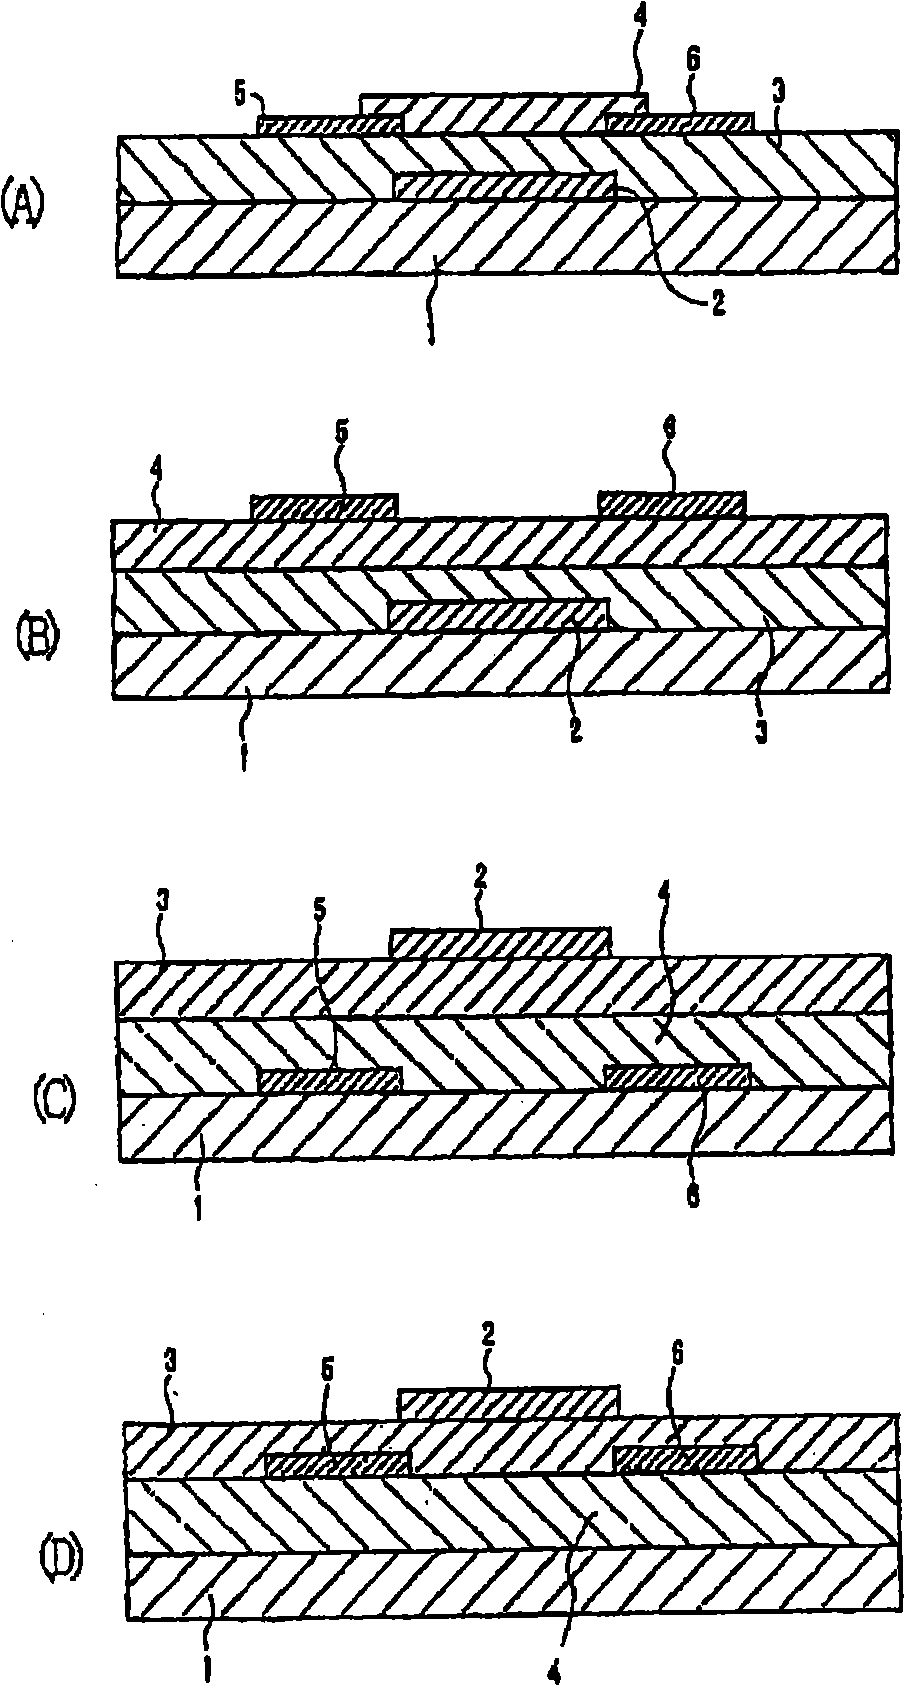 Insulating layer, electronic device, field effect transistor, and polyvinylthiophenol